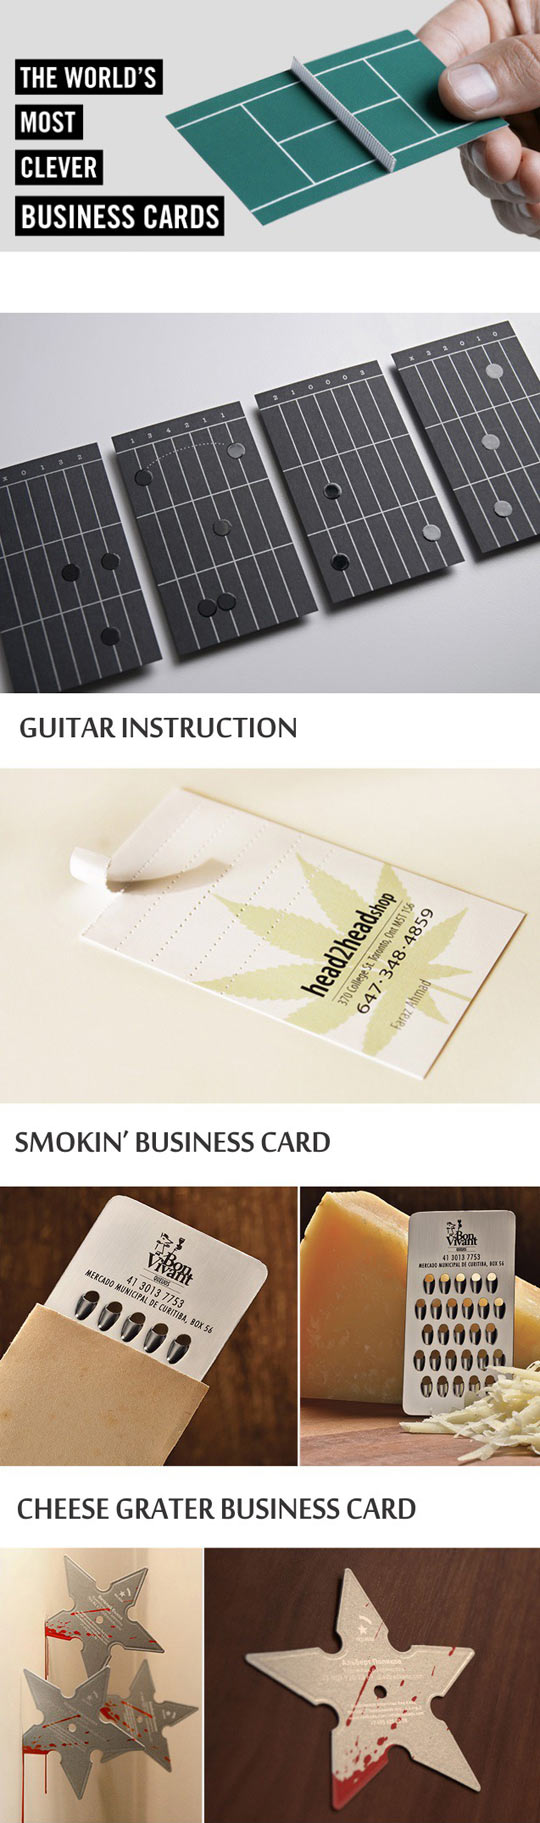 The World’s Most Clever Business Cards...